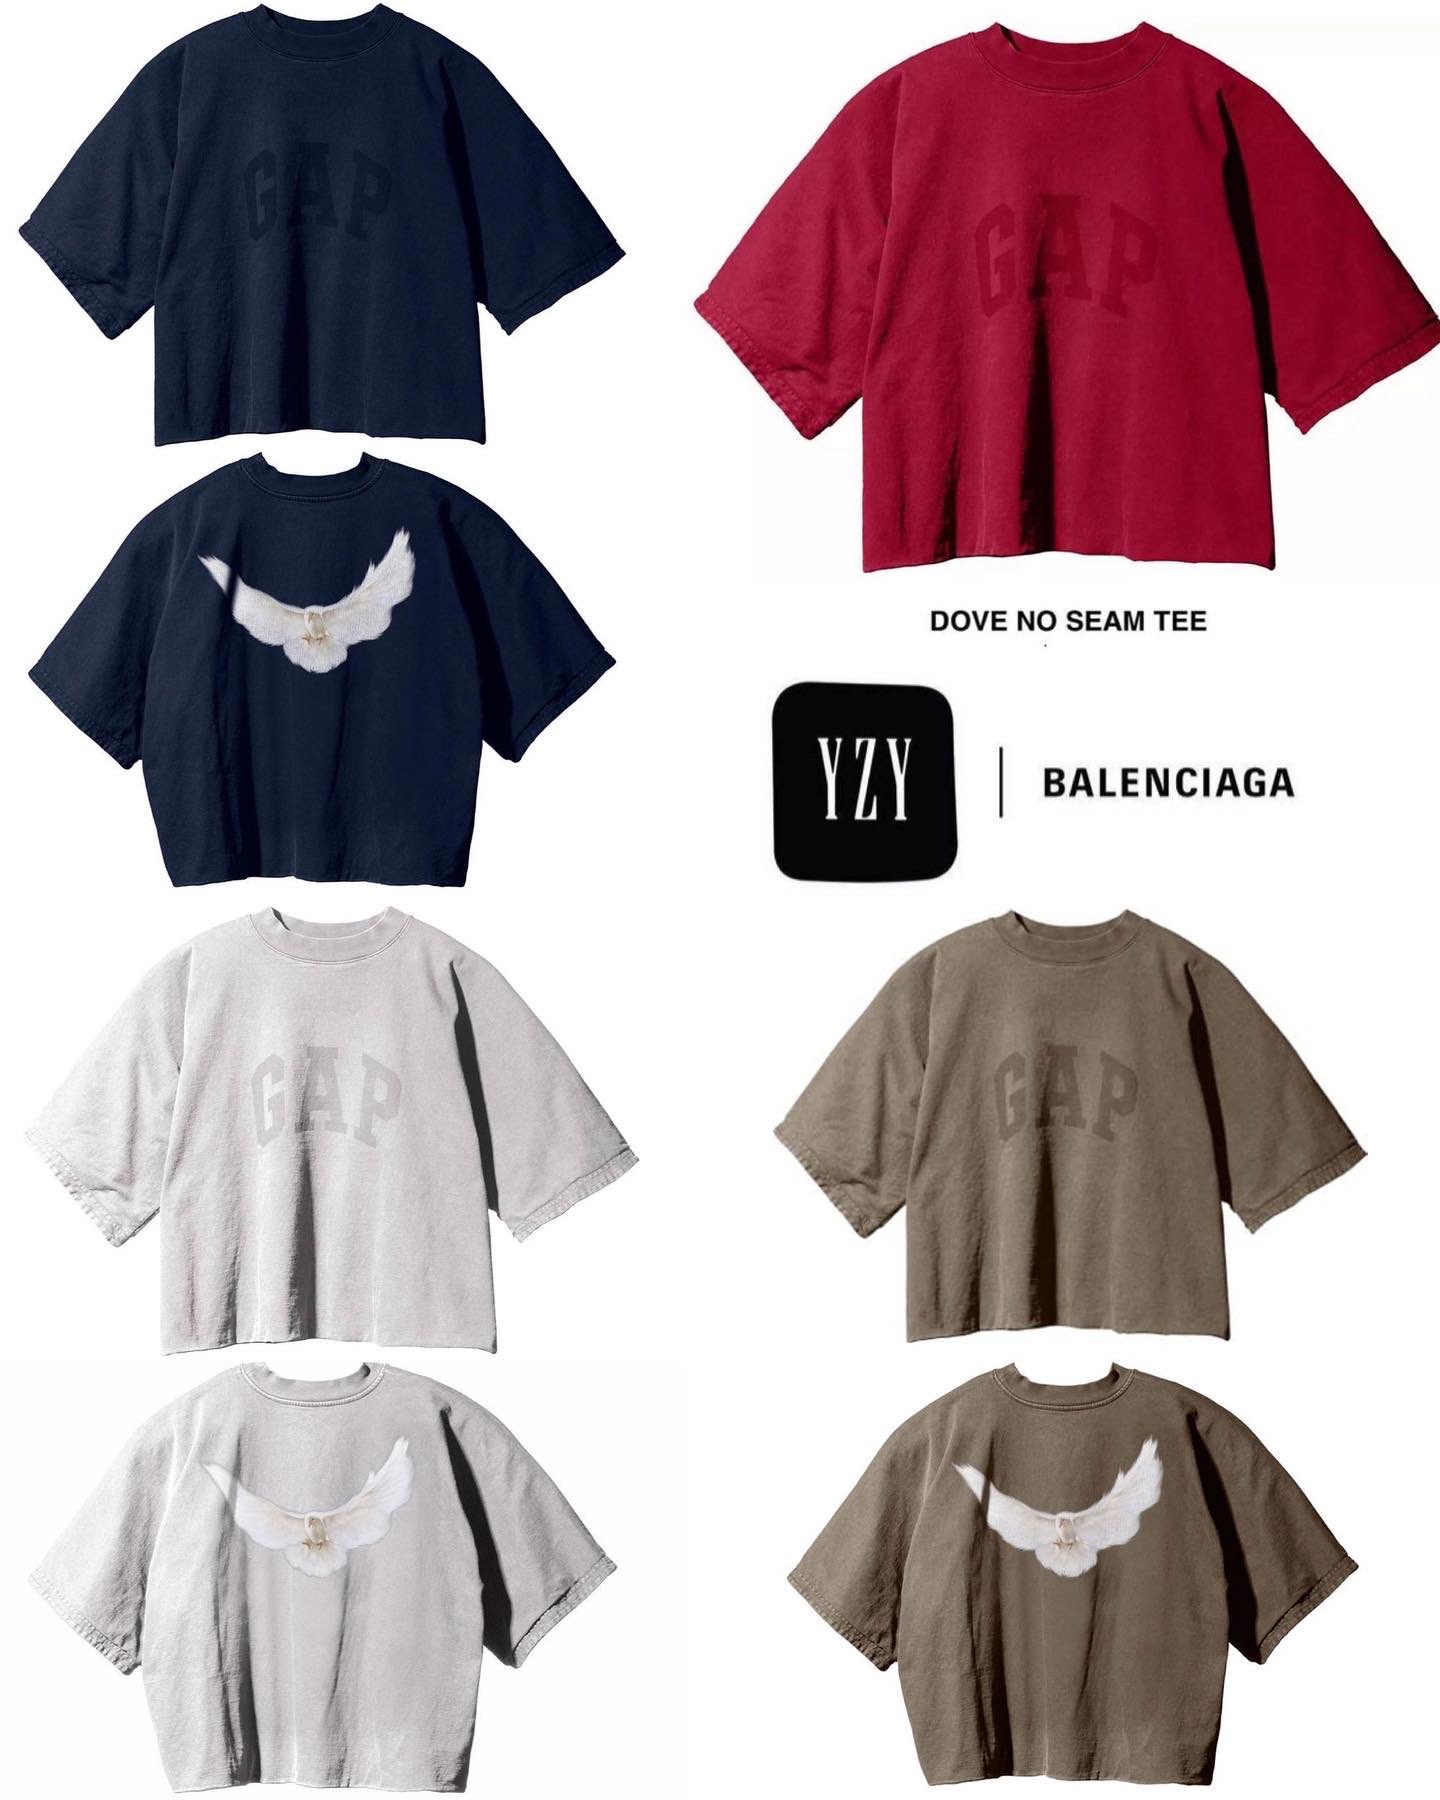 YEEZY GAP on X: YEEZY GAP NO SEAM TEES WHICH ONE ARE YOU GETTING